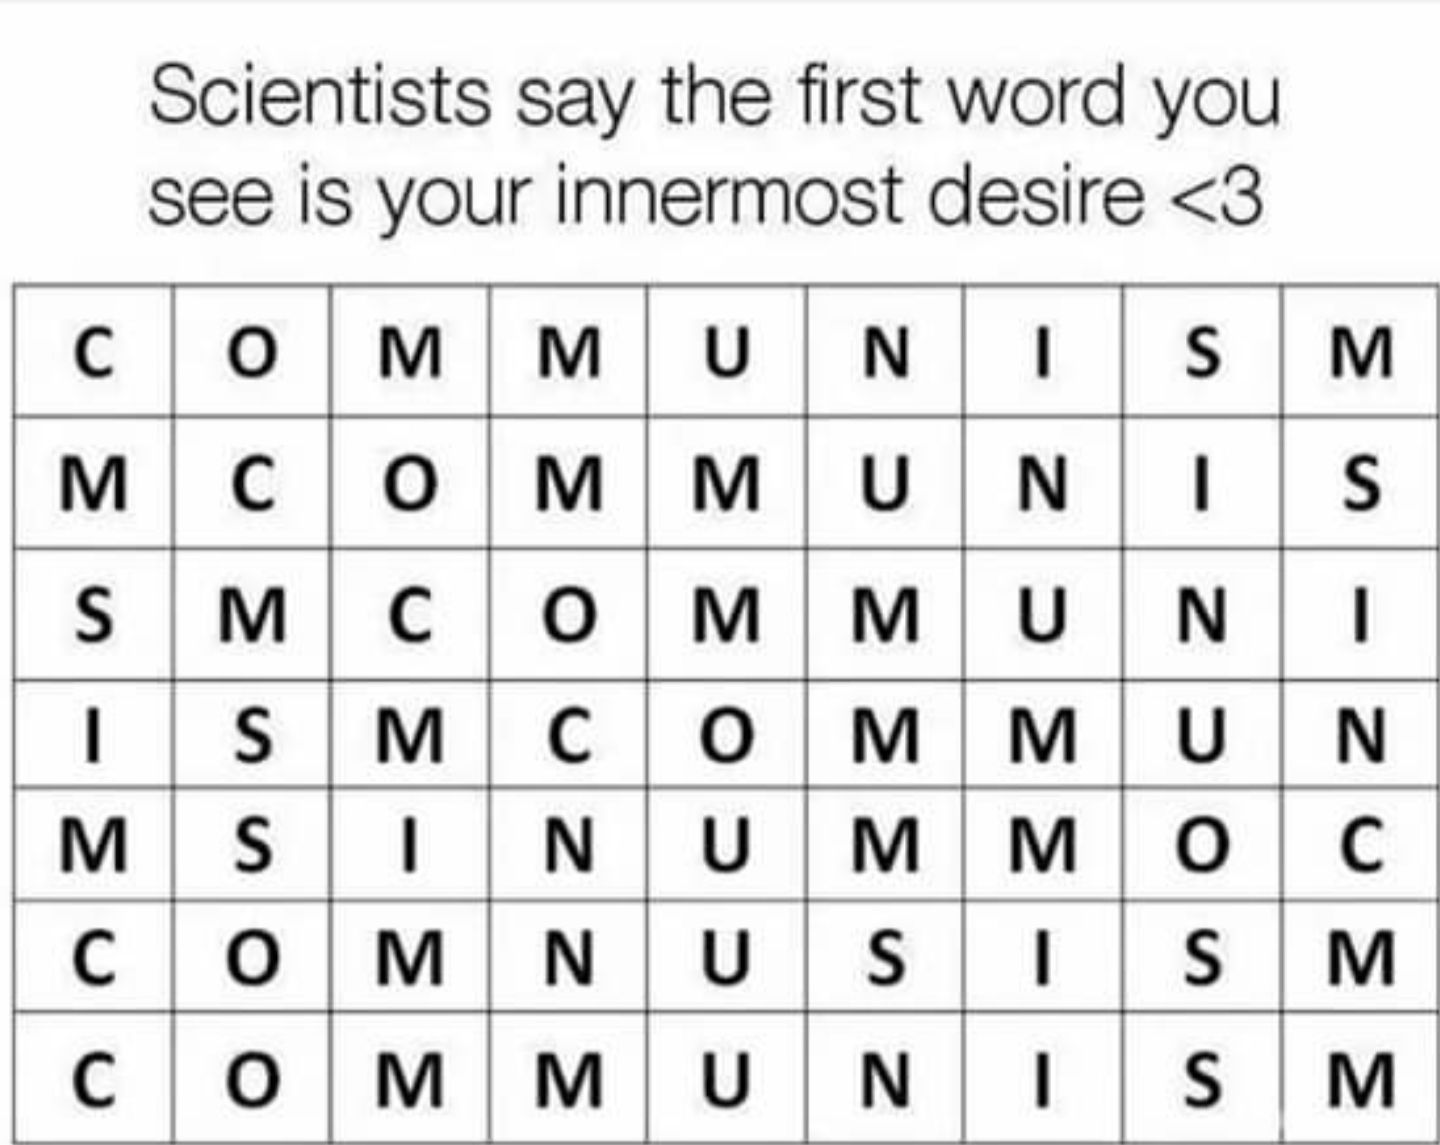 I only see cum